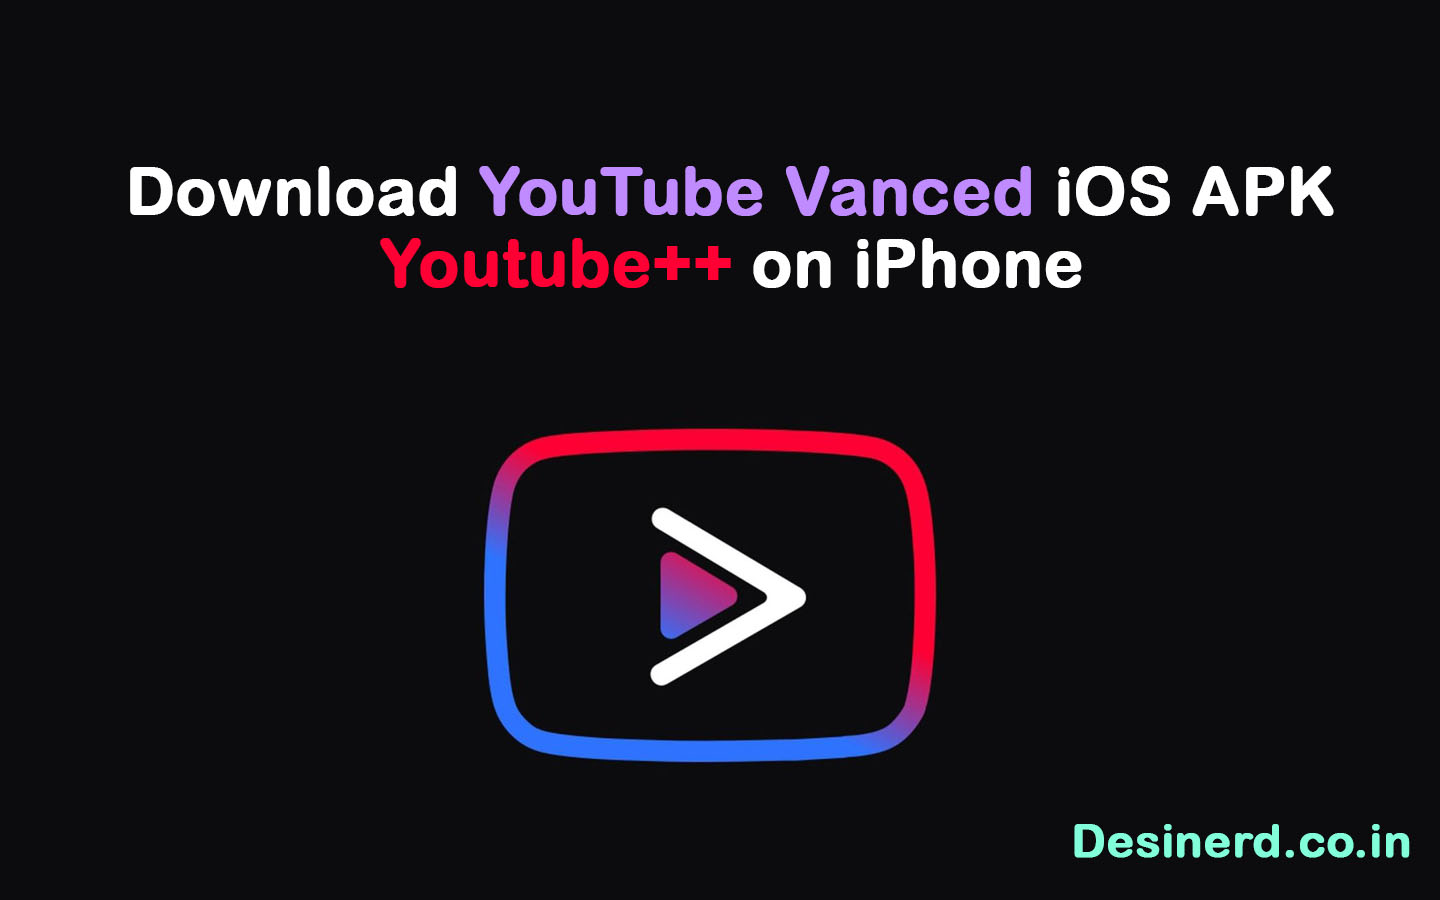 how to install youtube vanced app on iphone